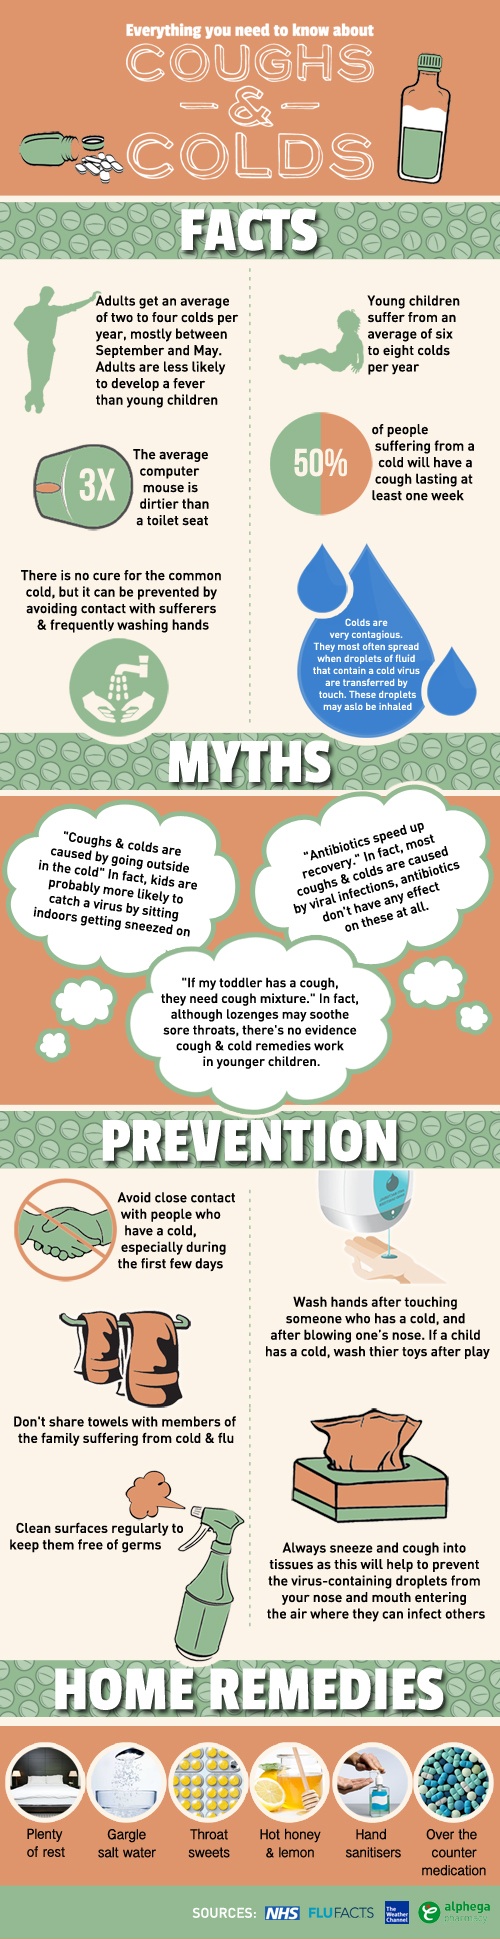 Coughs and Cold Myths and Trends